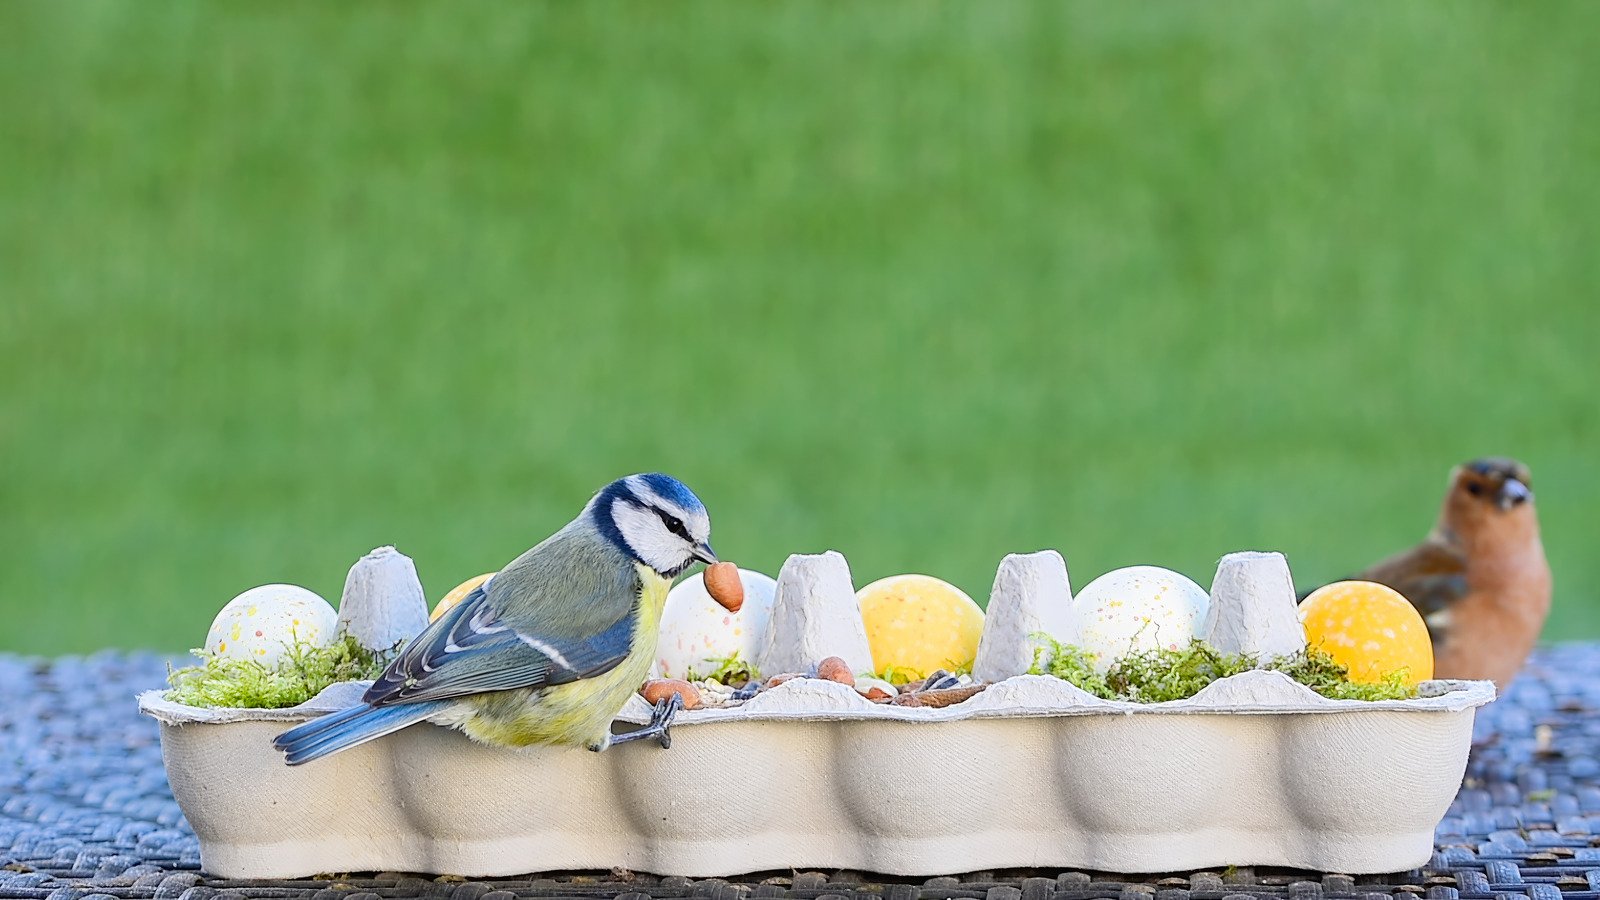 An Old Egg Carton Is The Secret To Attracting More Birds To Your Yard